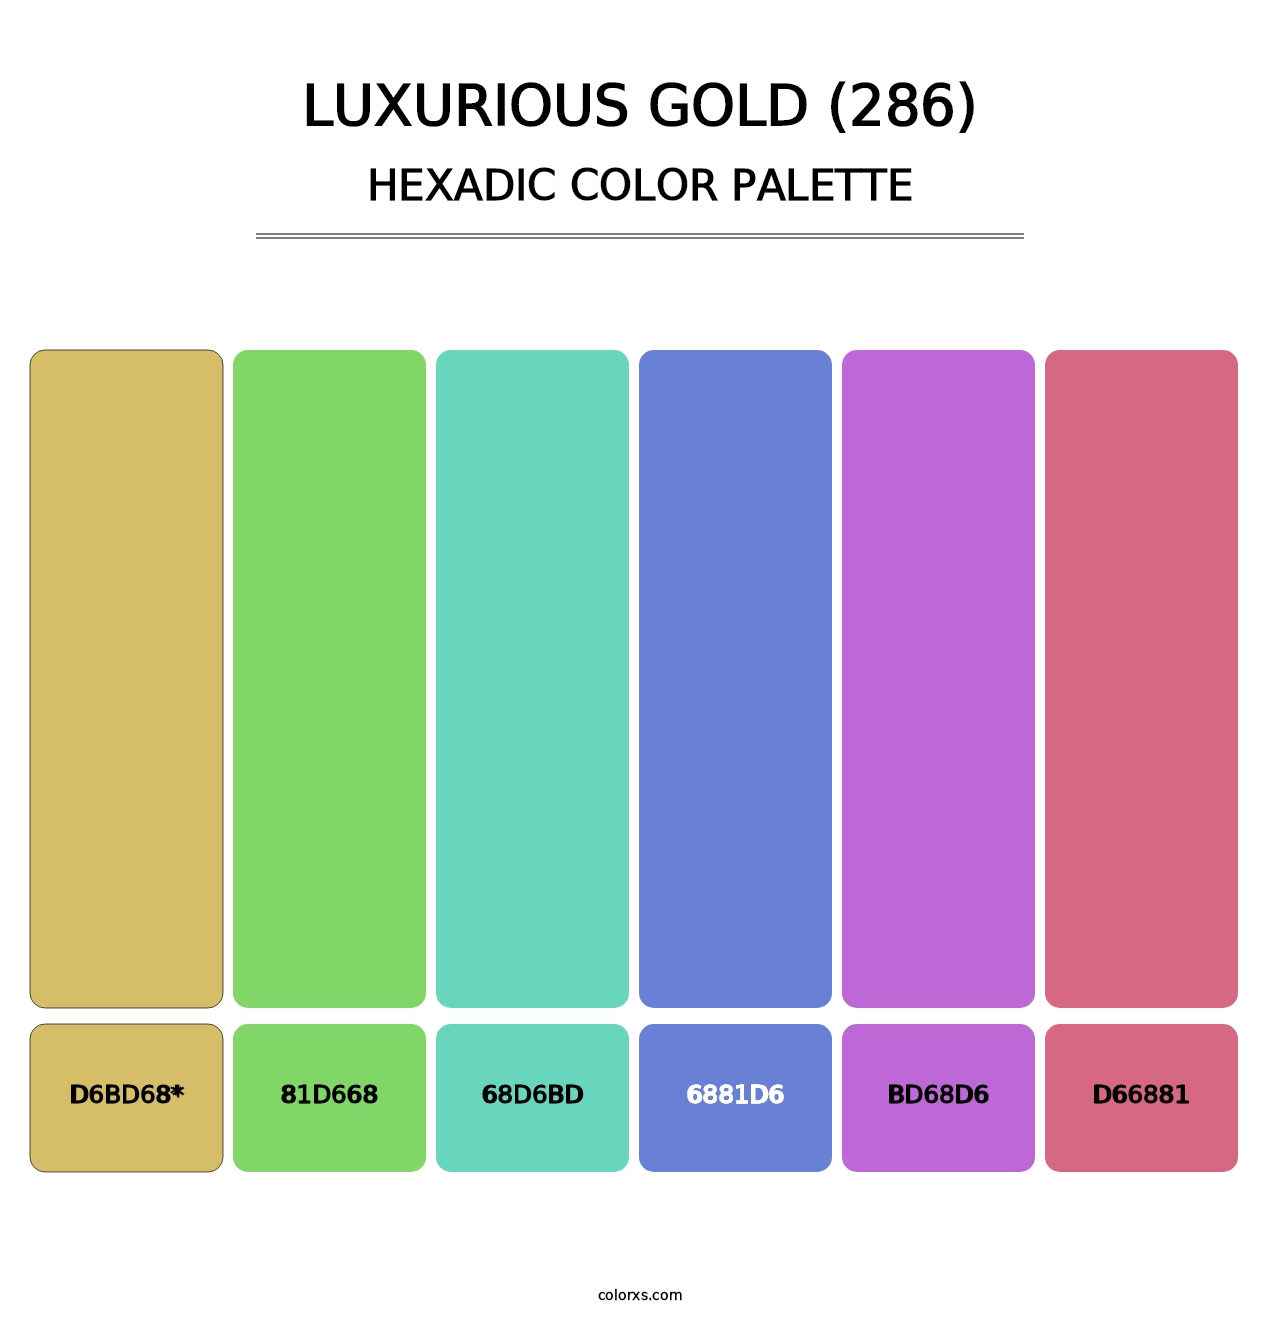 Luxurious Gold (286) - Hexadic Color Palette